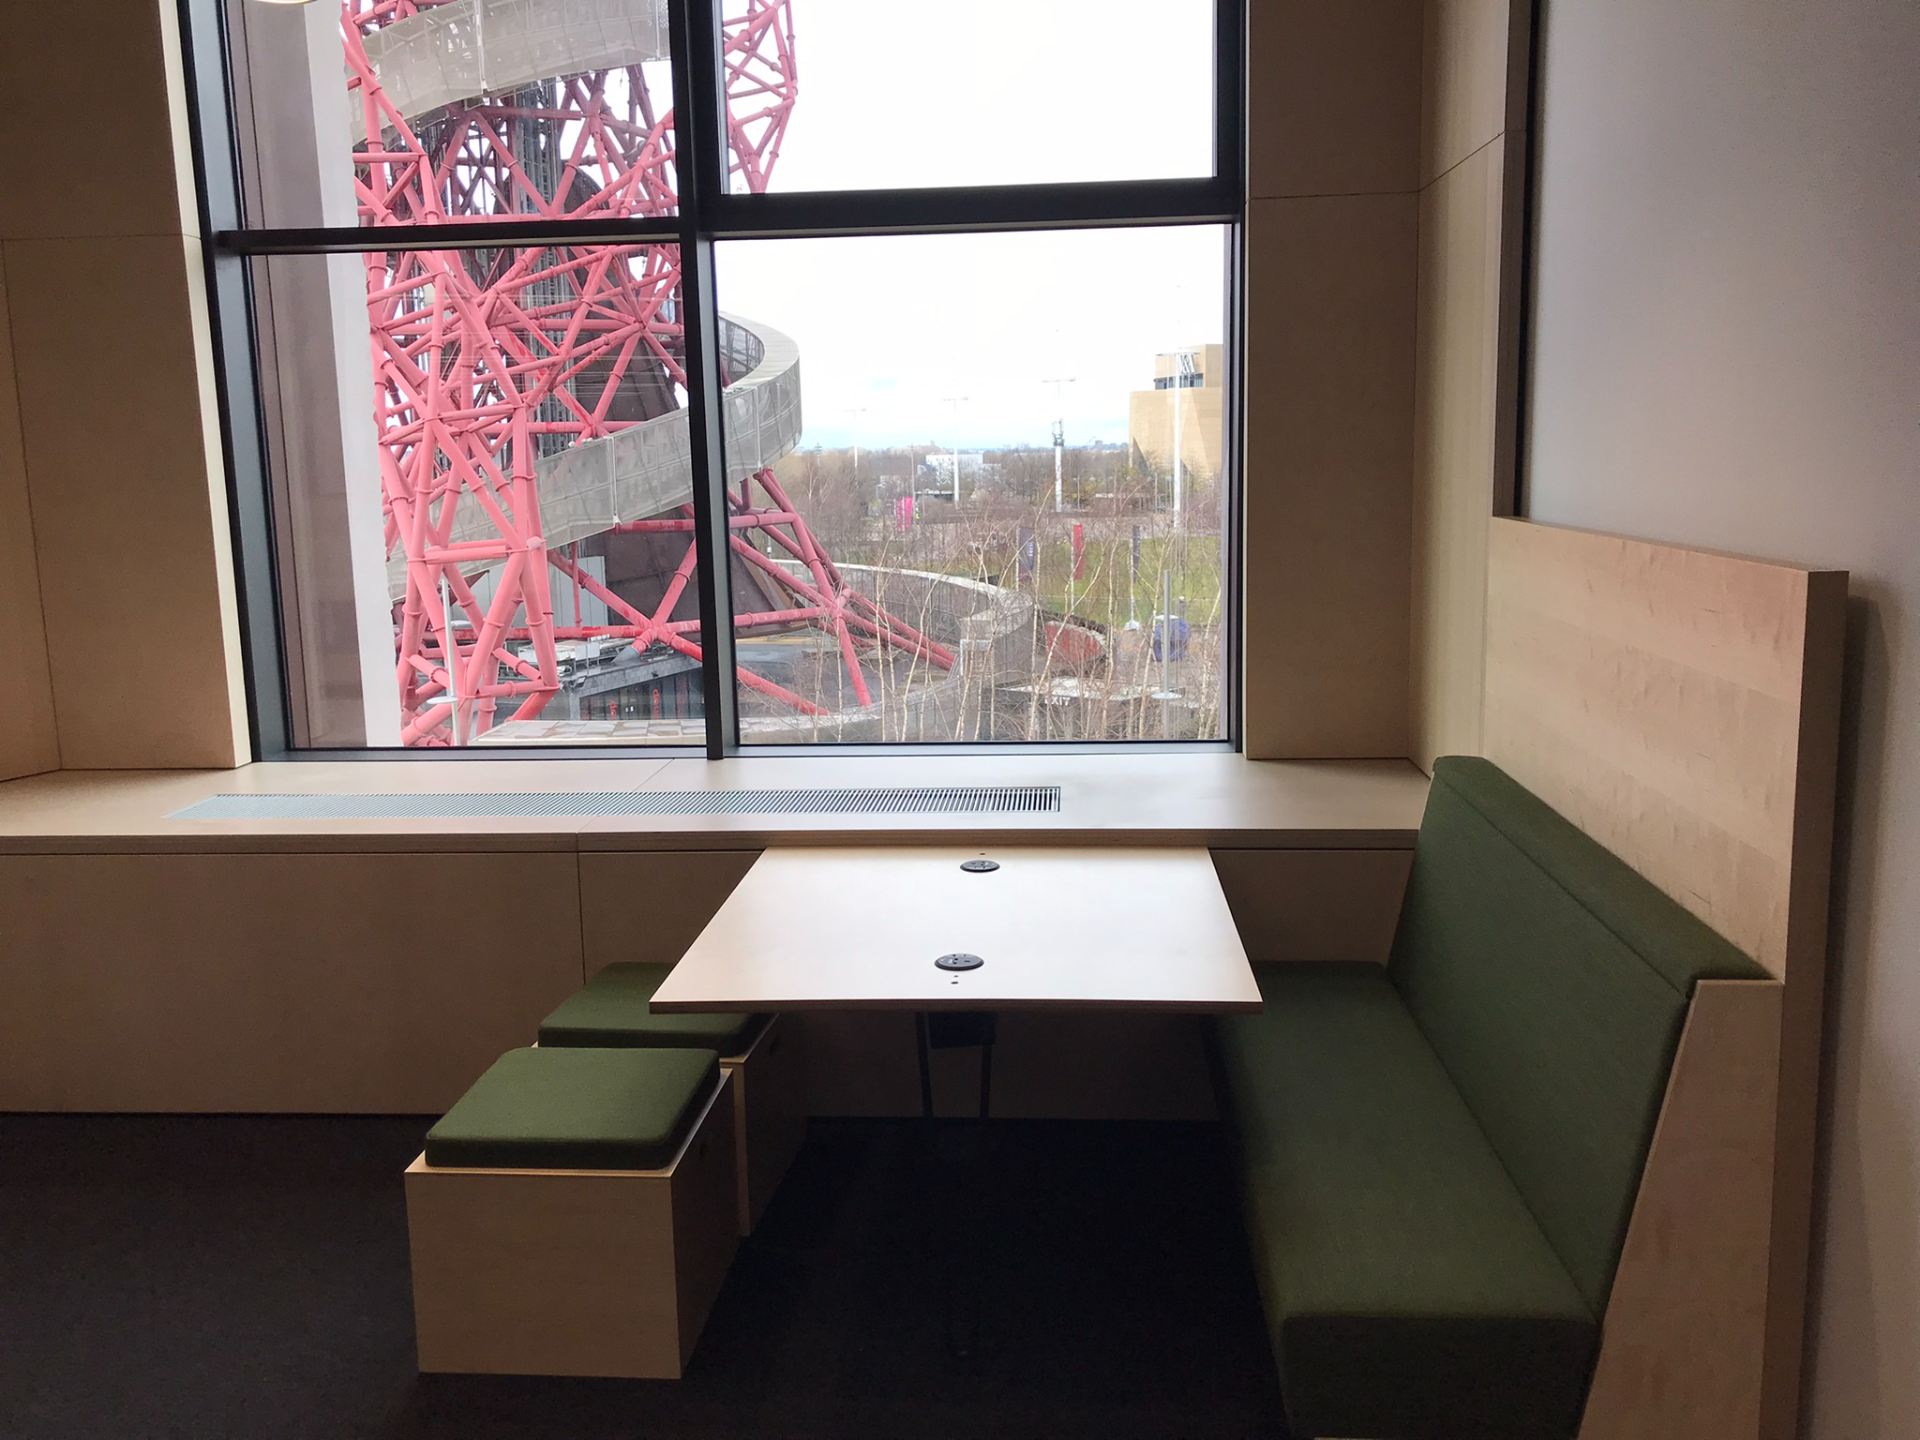 Learning space looking onto the ArcelorMittal Orbit through the window